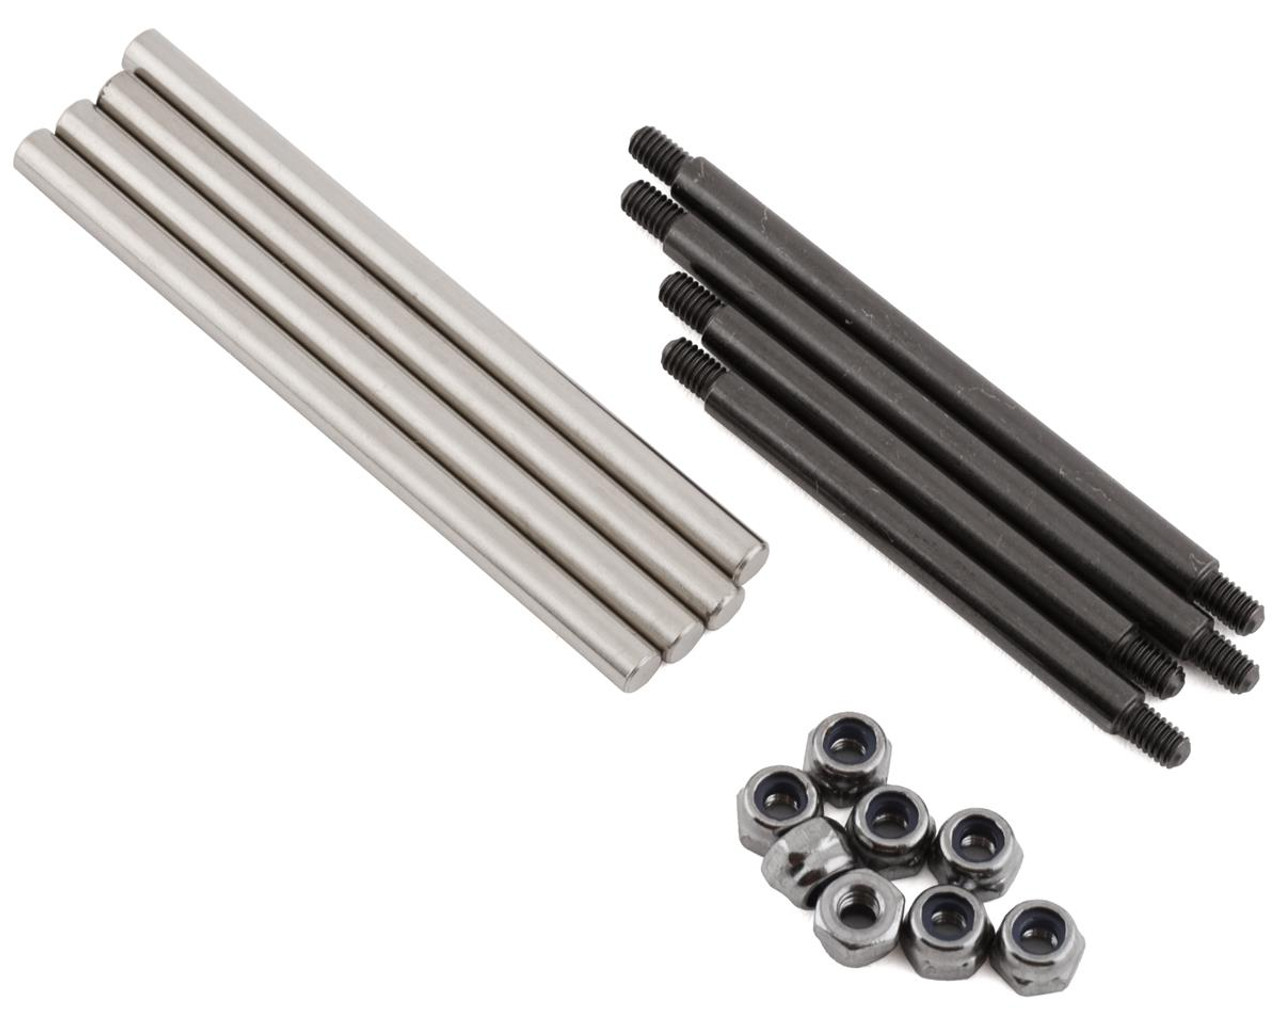 Traxxas 9042X Suspension pin set, extreme heavy duty (for use with #9080 upgrade kit)